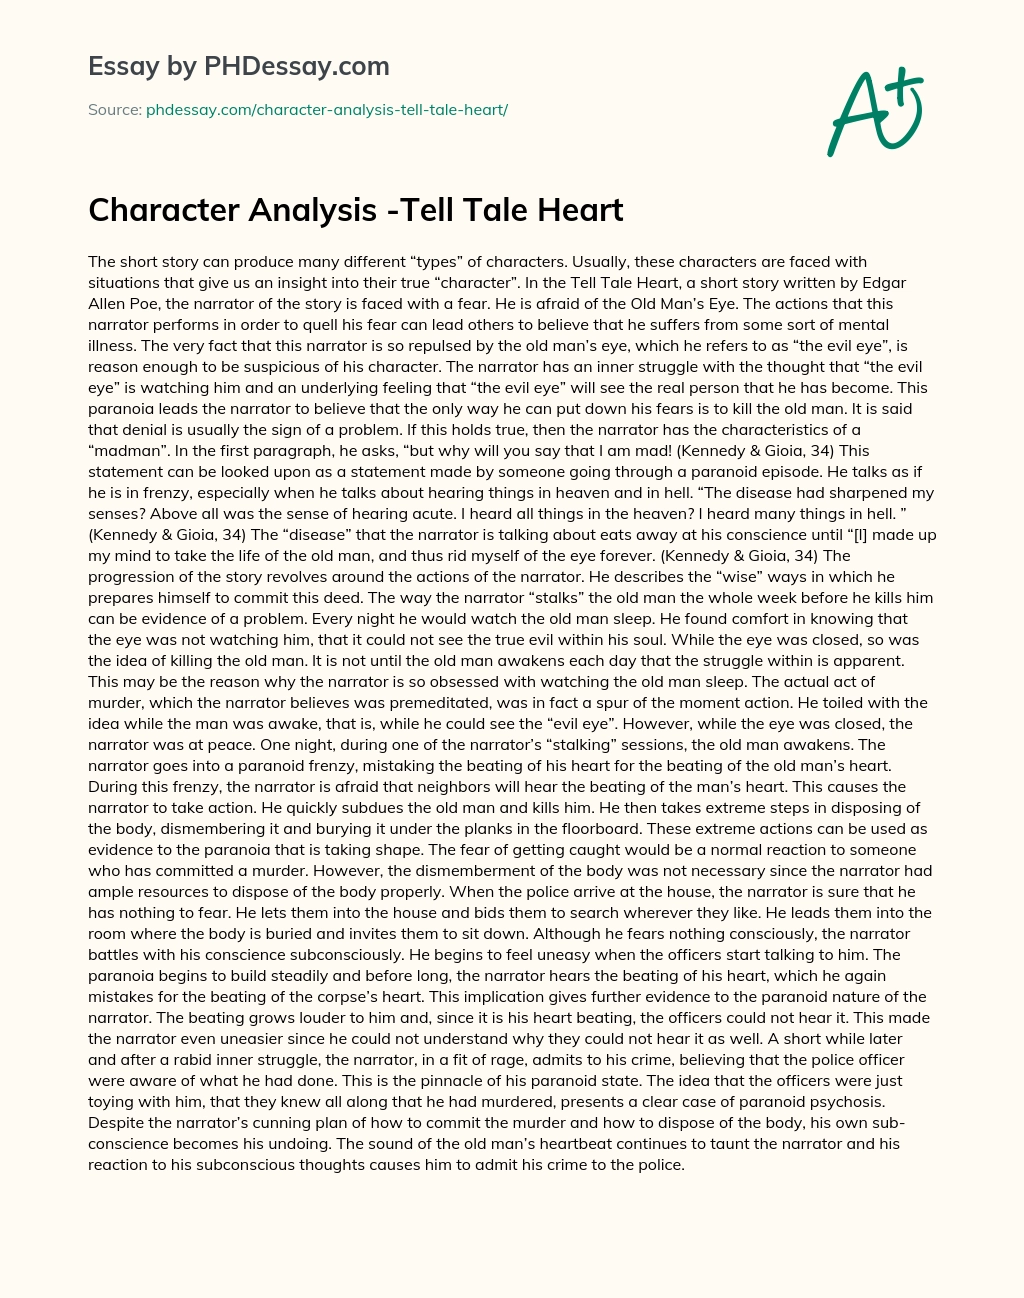 Character Analysis -Tell Tale Heart essay